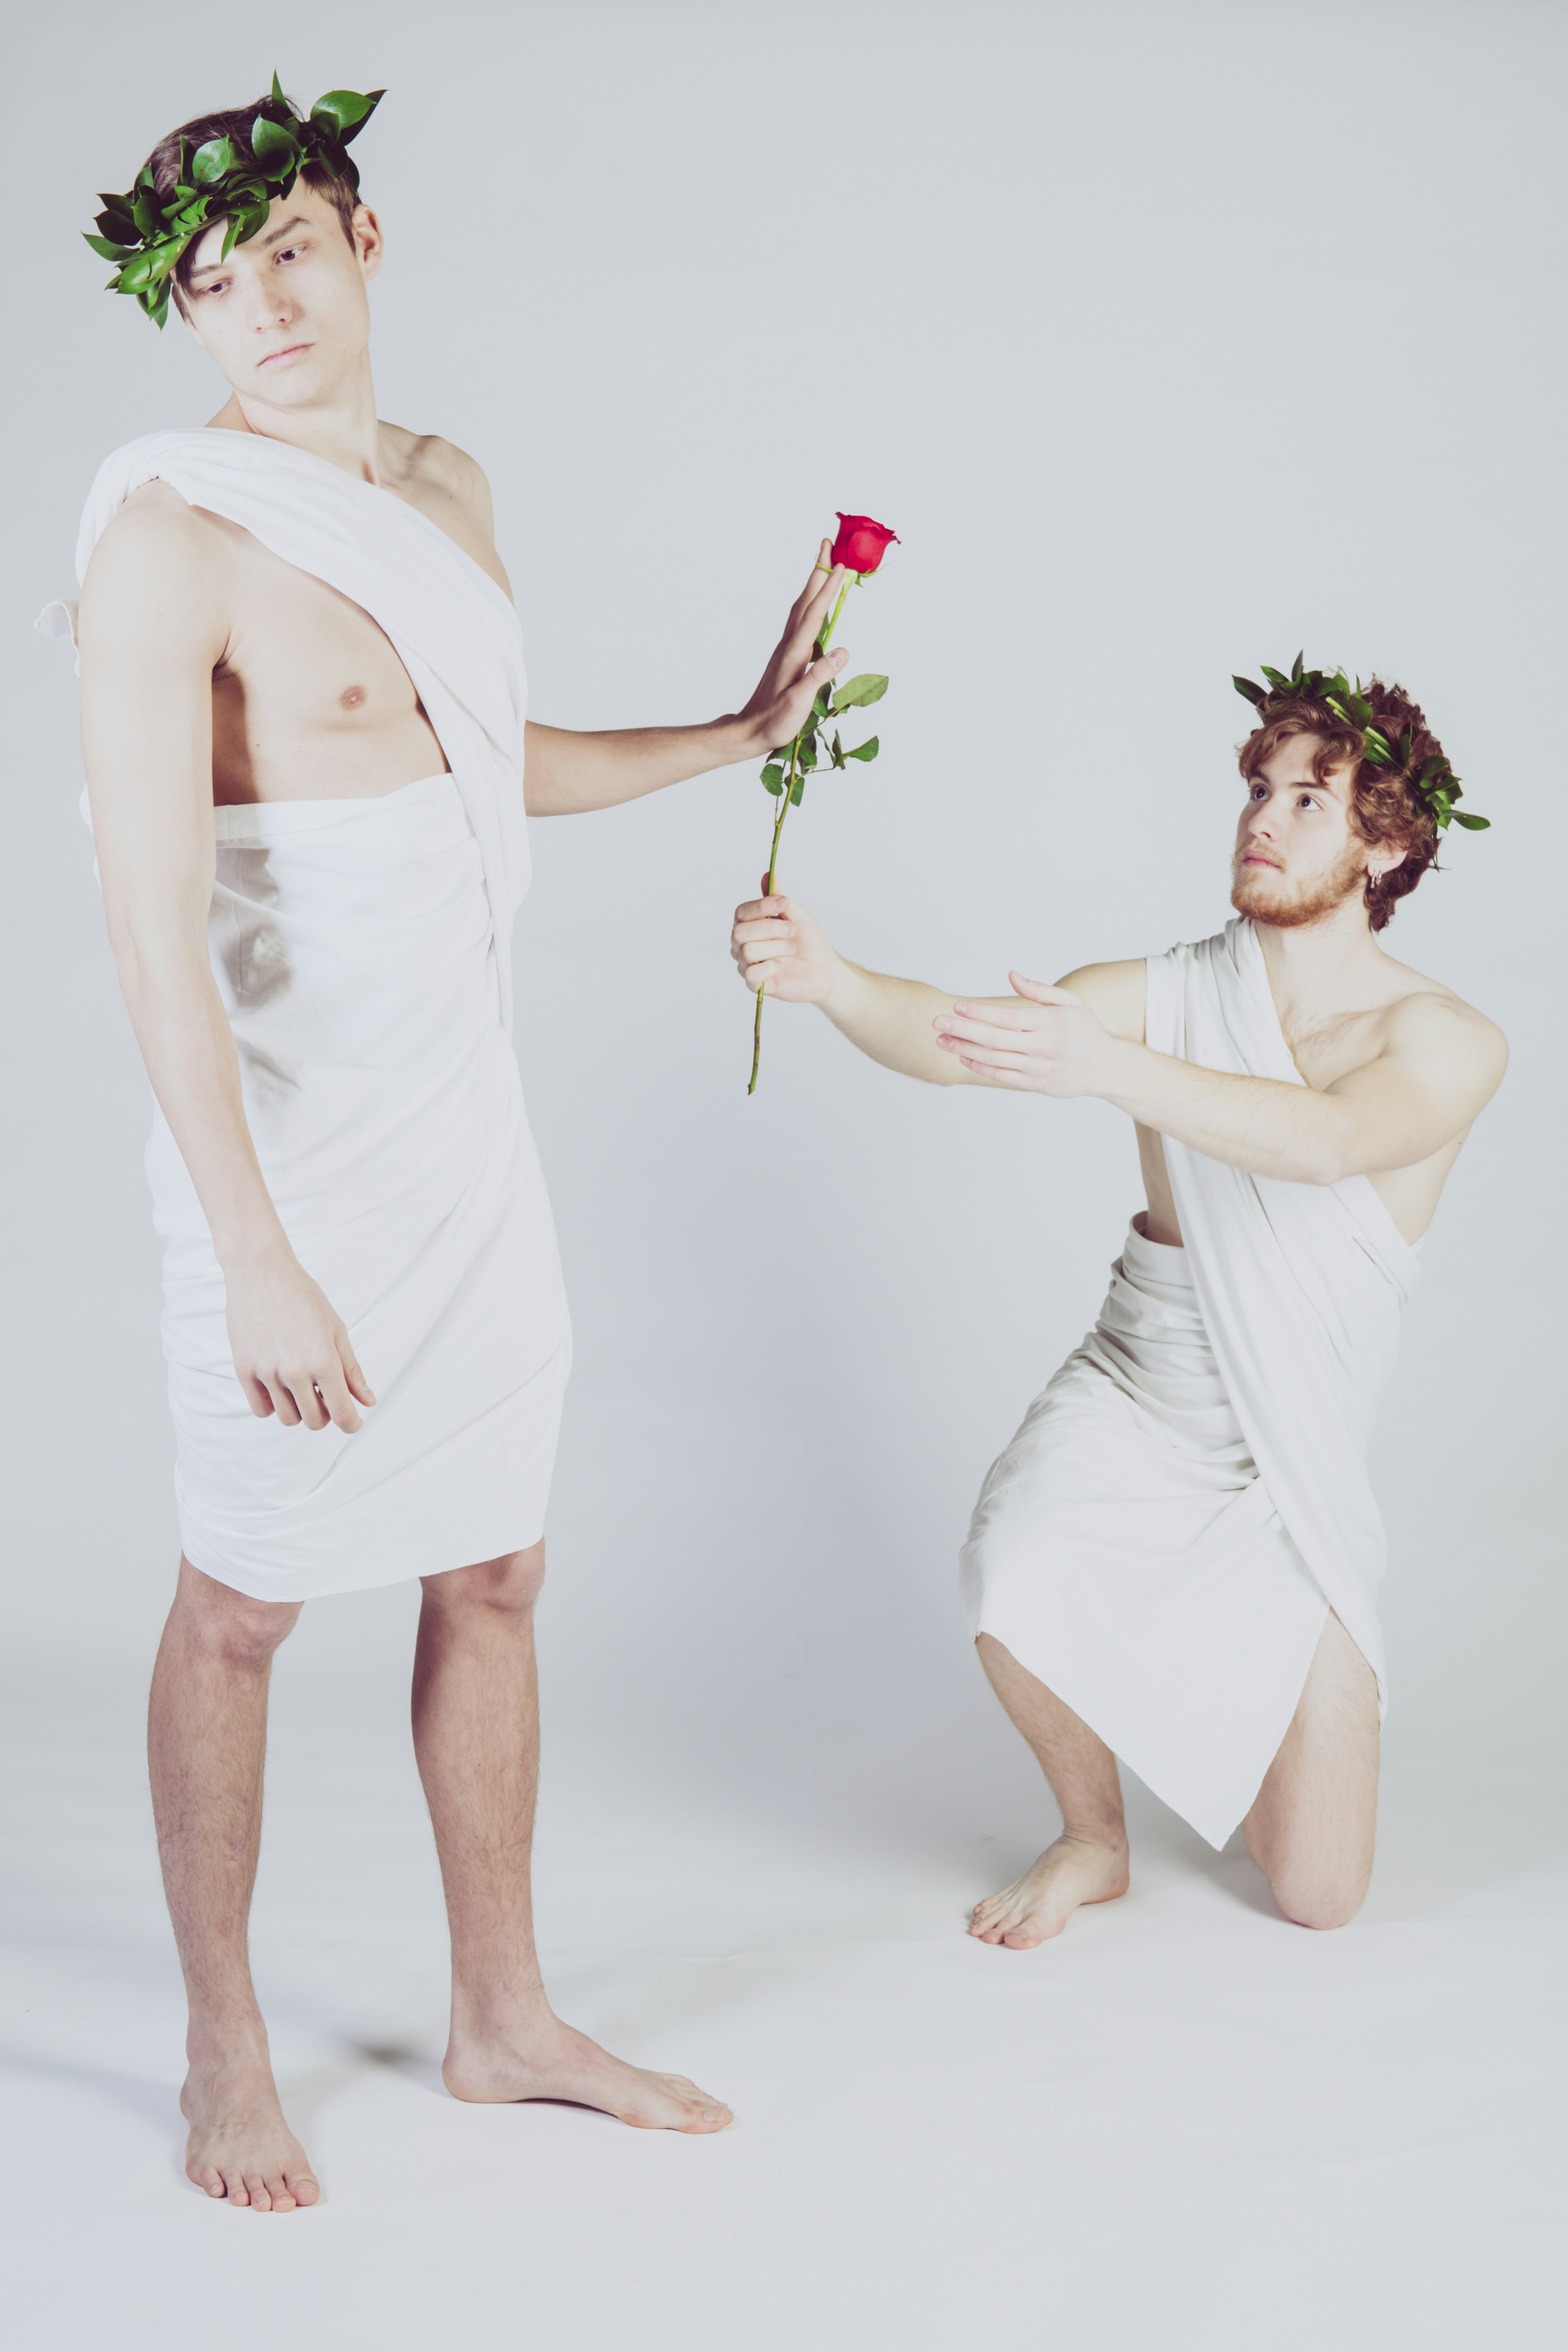 Studio project about narcissus’ myth